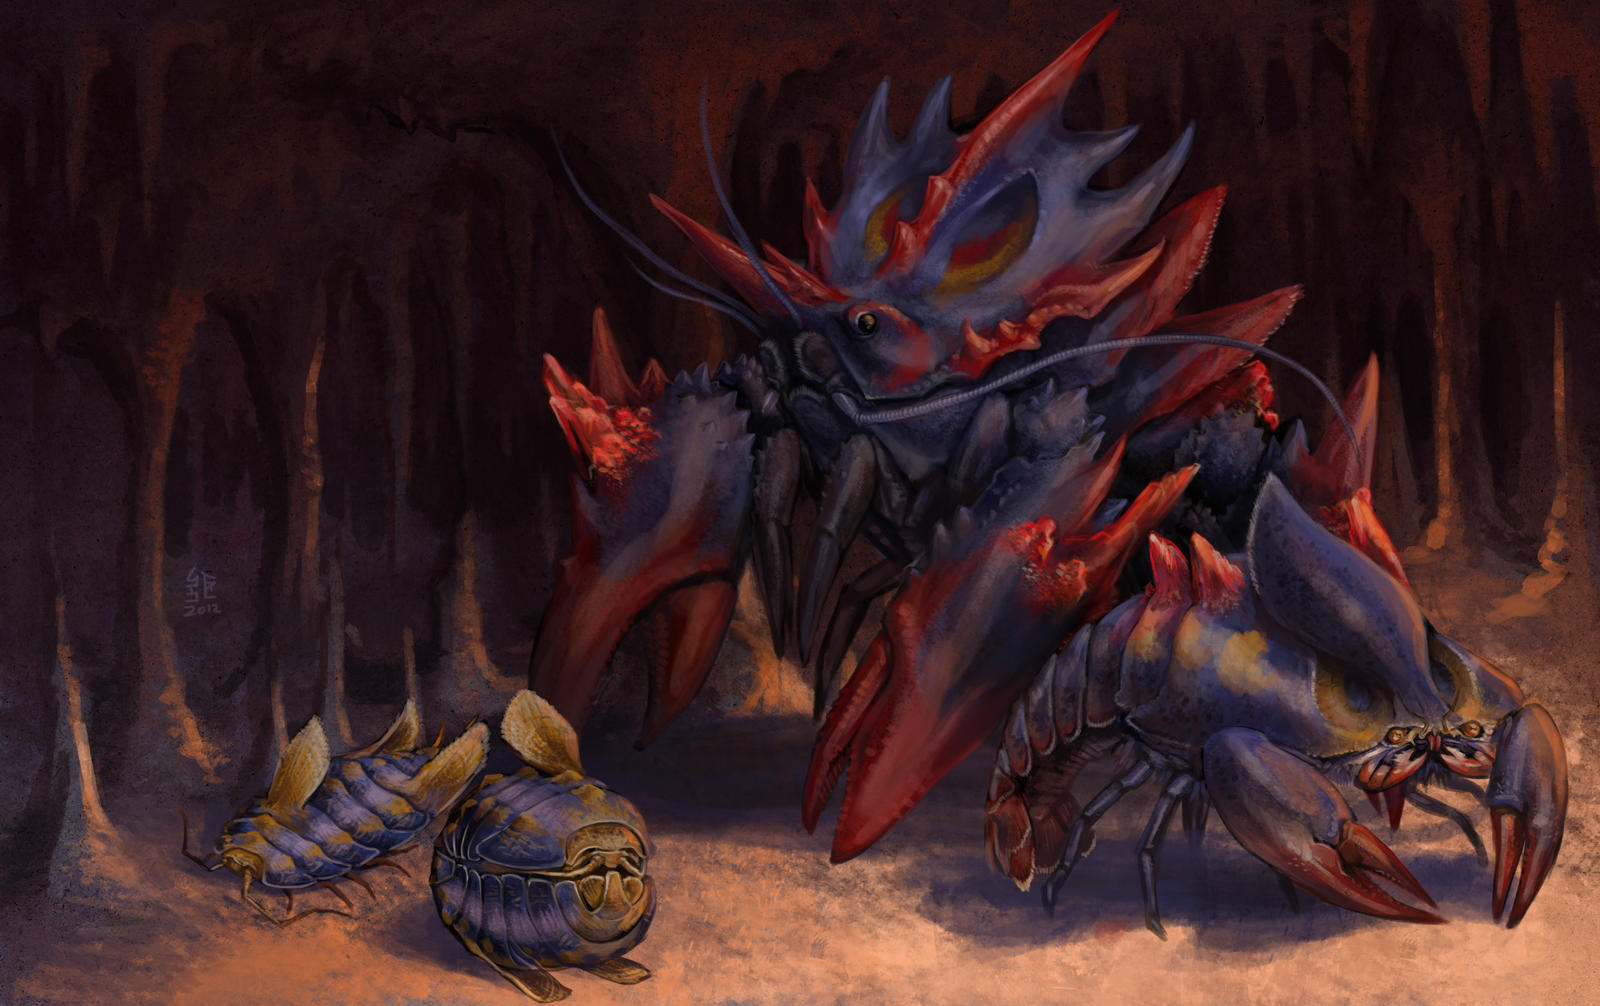 gigalith_evolution_line_by_ultyzarus_d5m986k-fullview.jpg